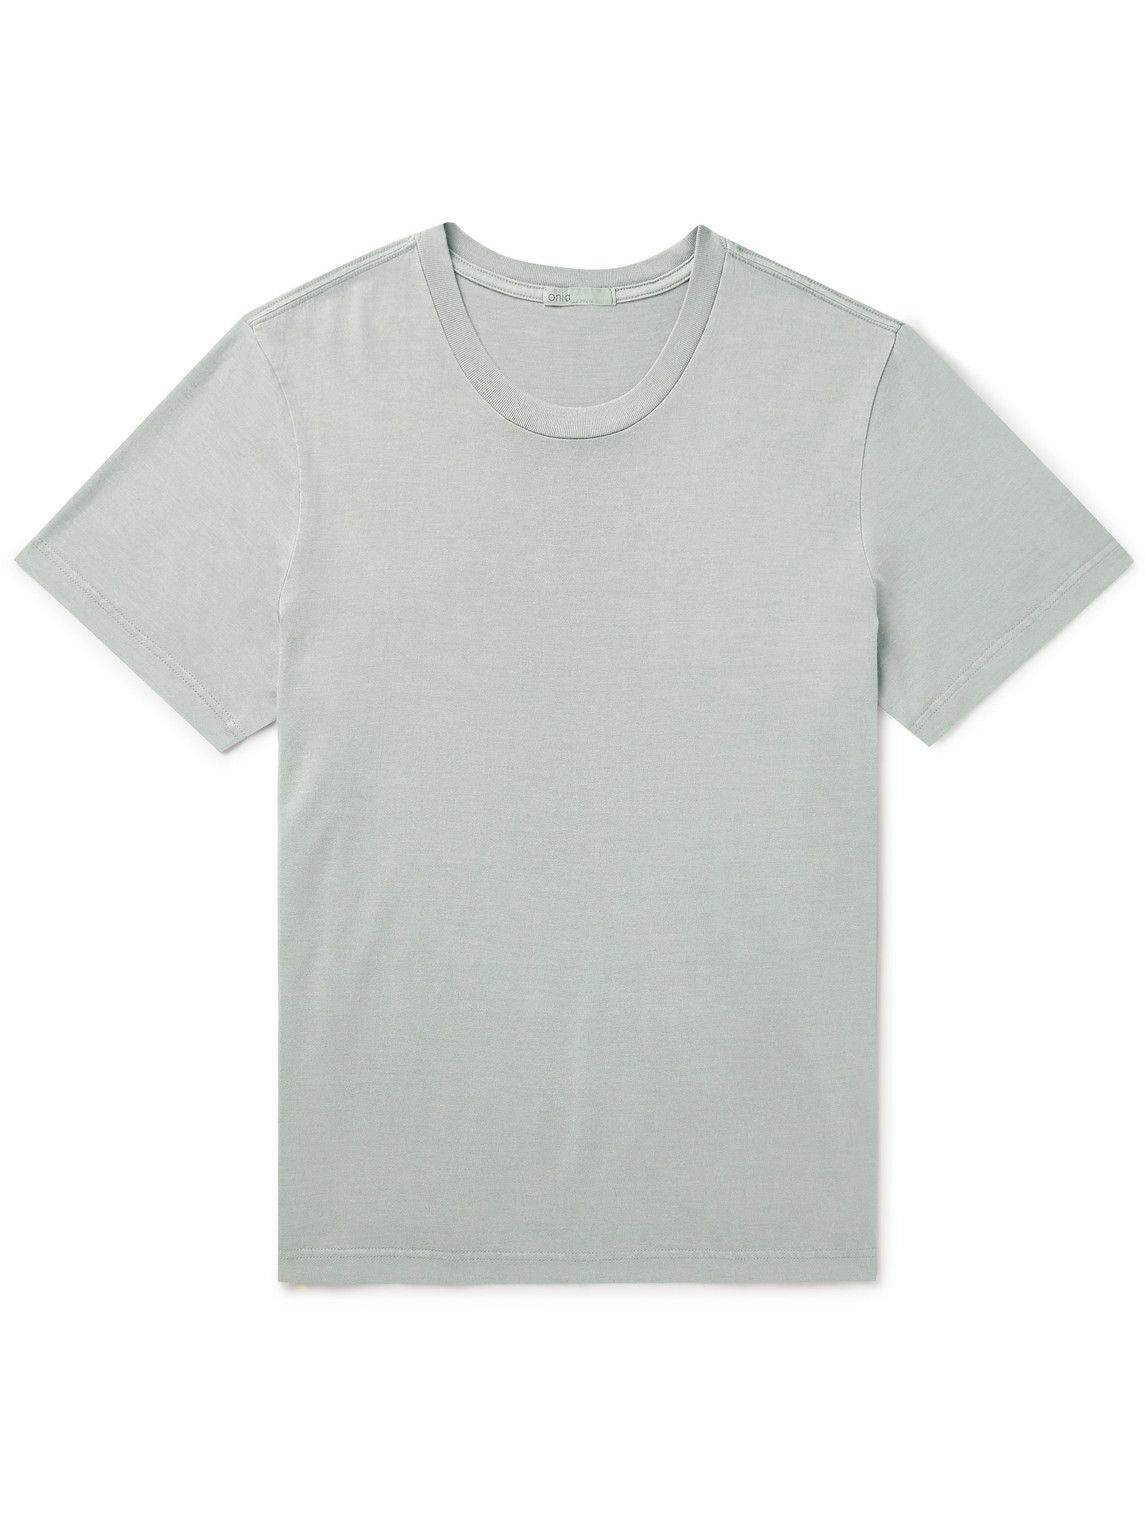 Photo: Onia - Garment-Dyed Cotton and Modal-Blend Jersey T-Shirt - Green